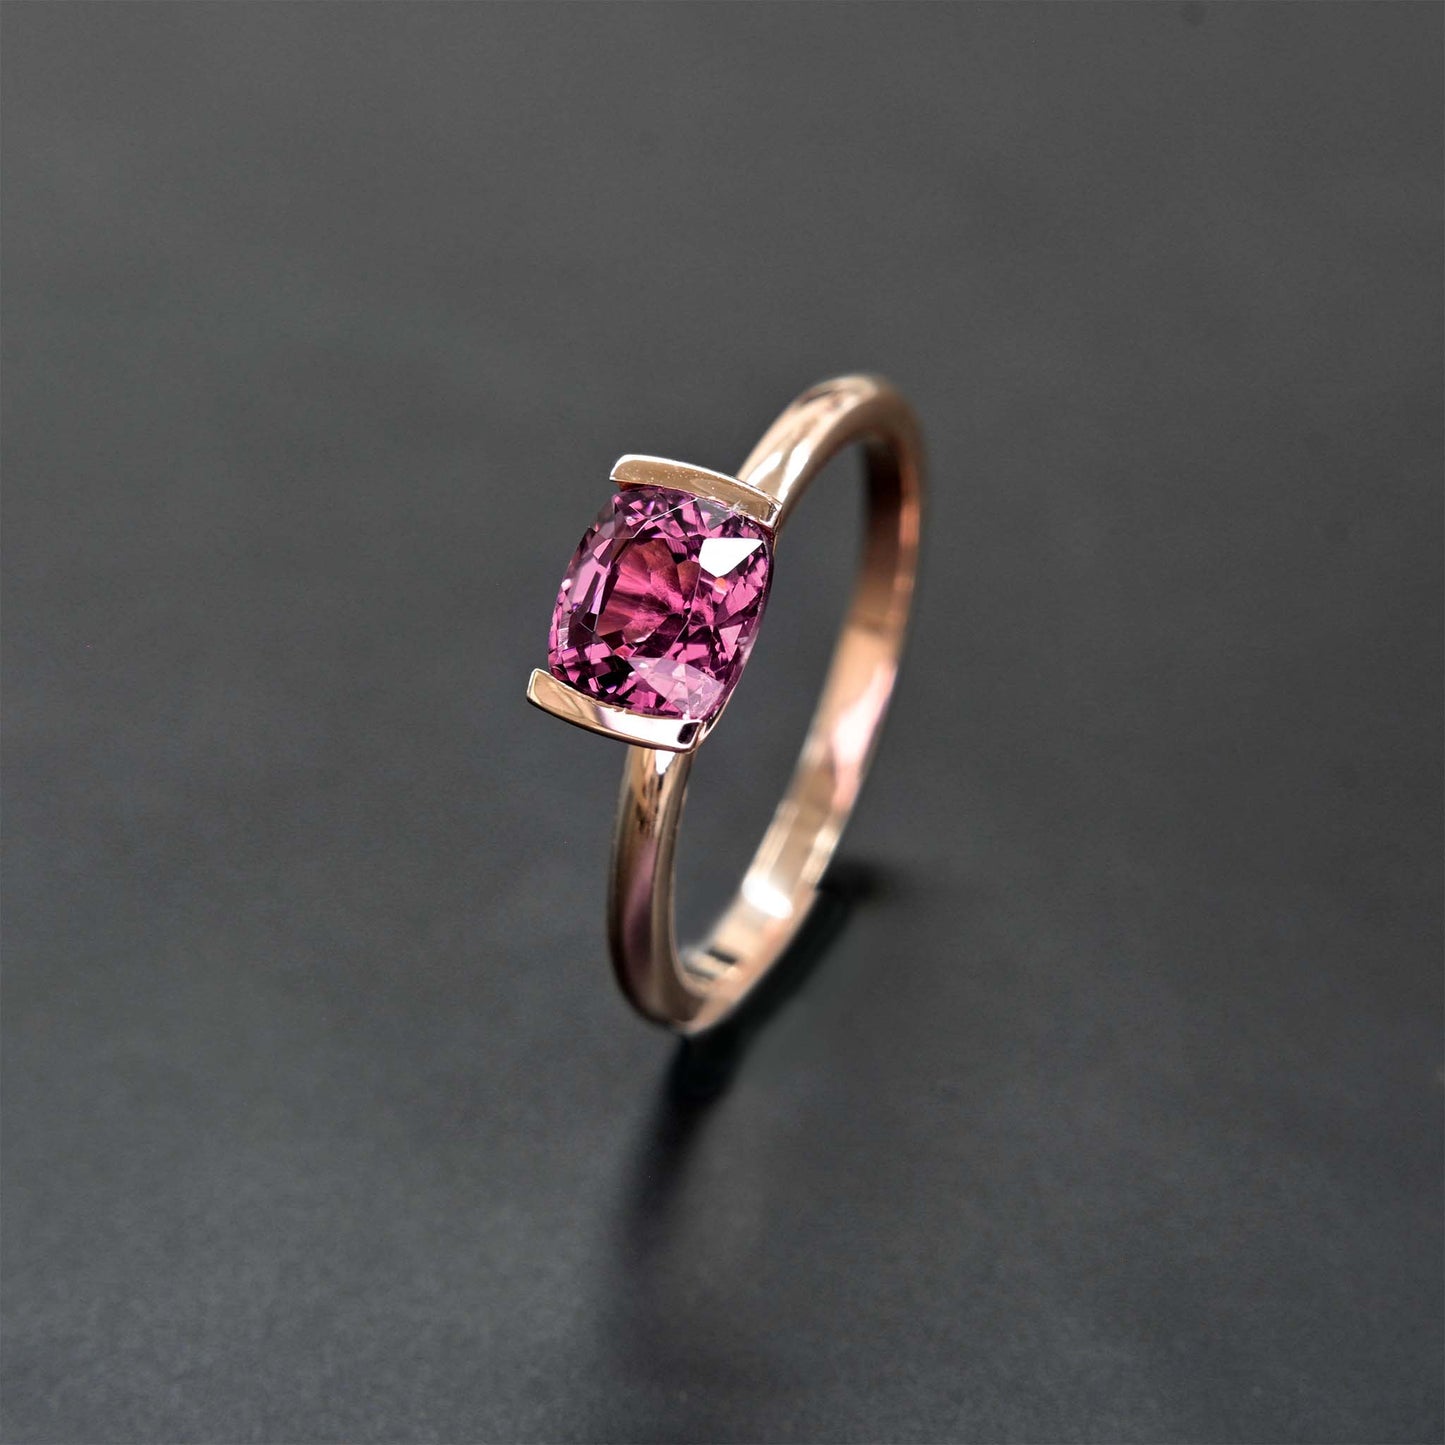 Amazing unheated spinel ring in rose gold